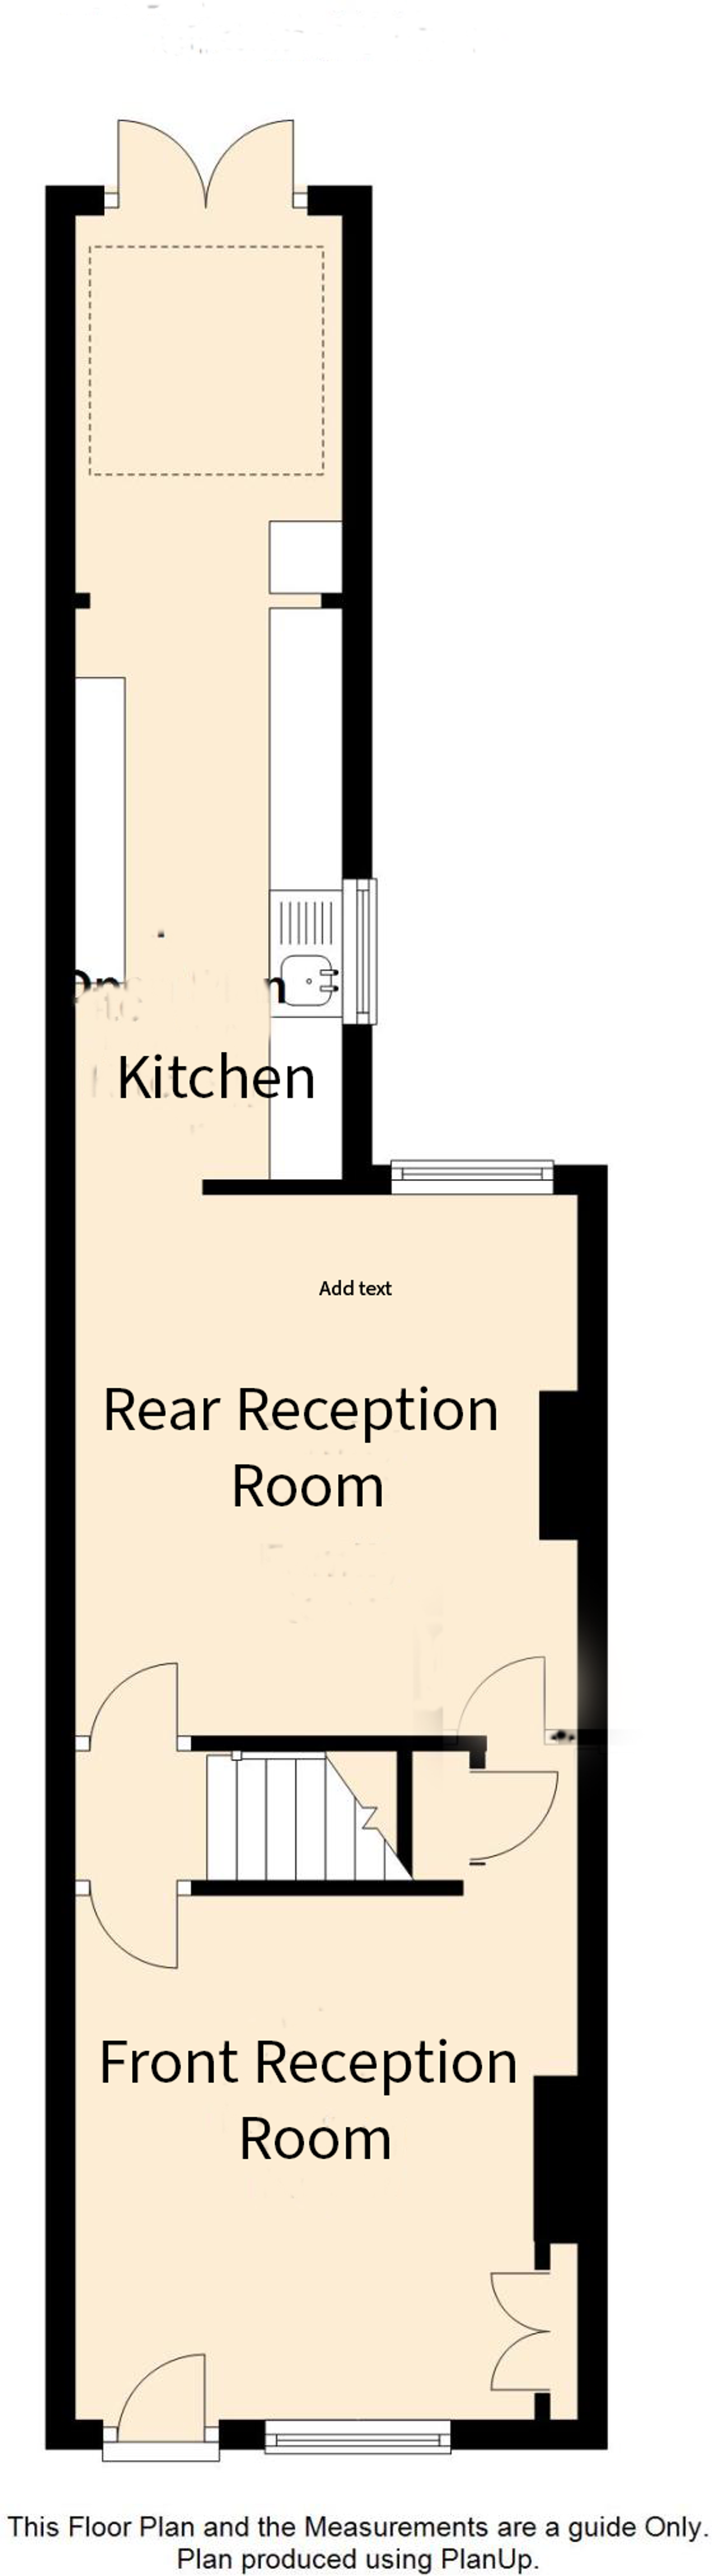 3 bed mid-terraced house for sale in Montague Road, Leicester - Property floorplan